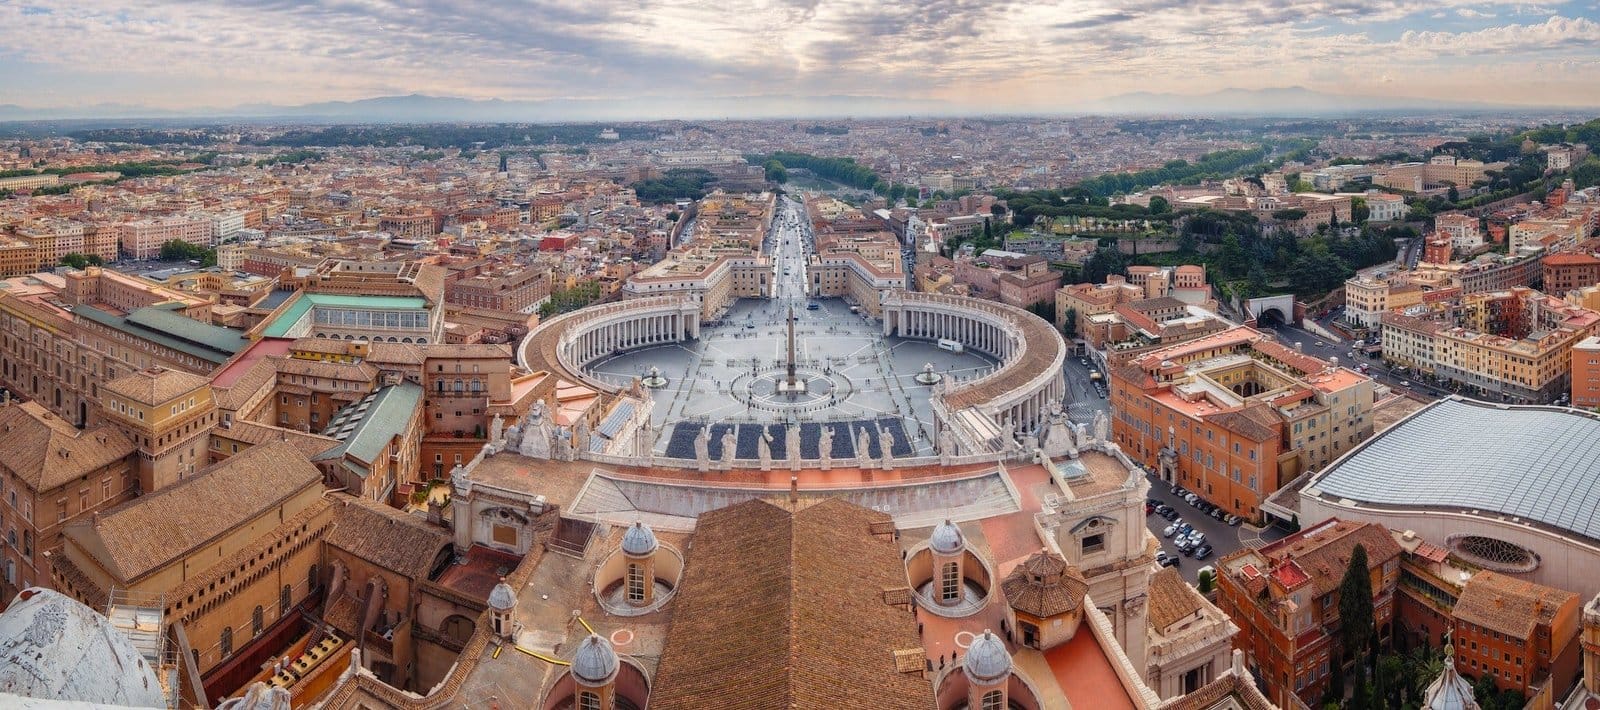 Panoramic view from St Peters basilica in Vatican, Rome